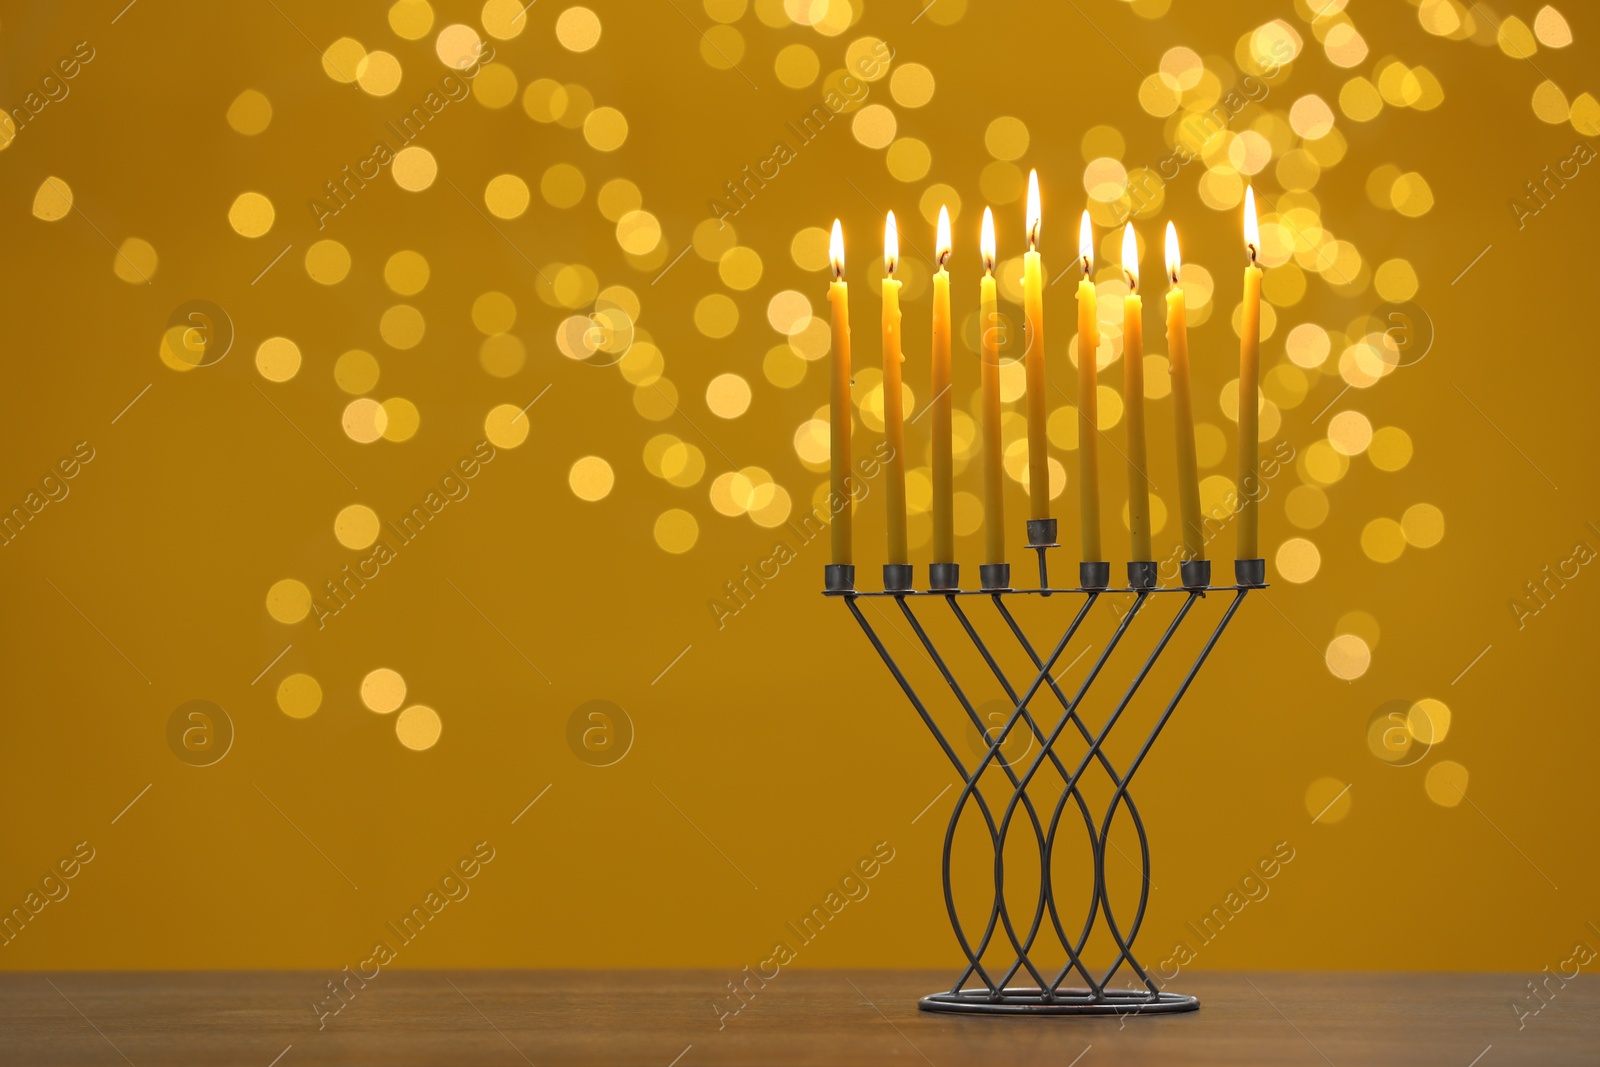 Photo of Hanukkah celebration. Menorah with burning candles on table against yellow background with blurred lights, space for text